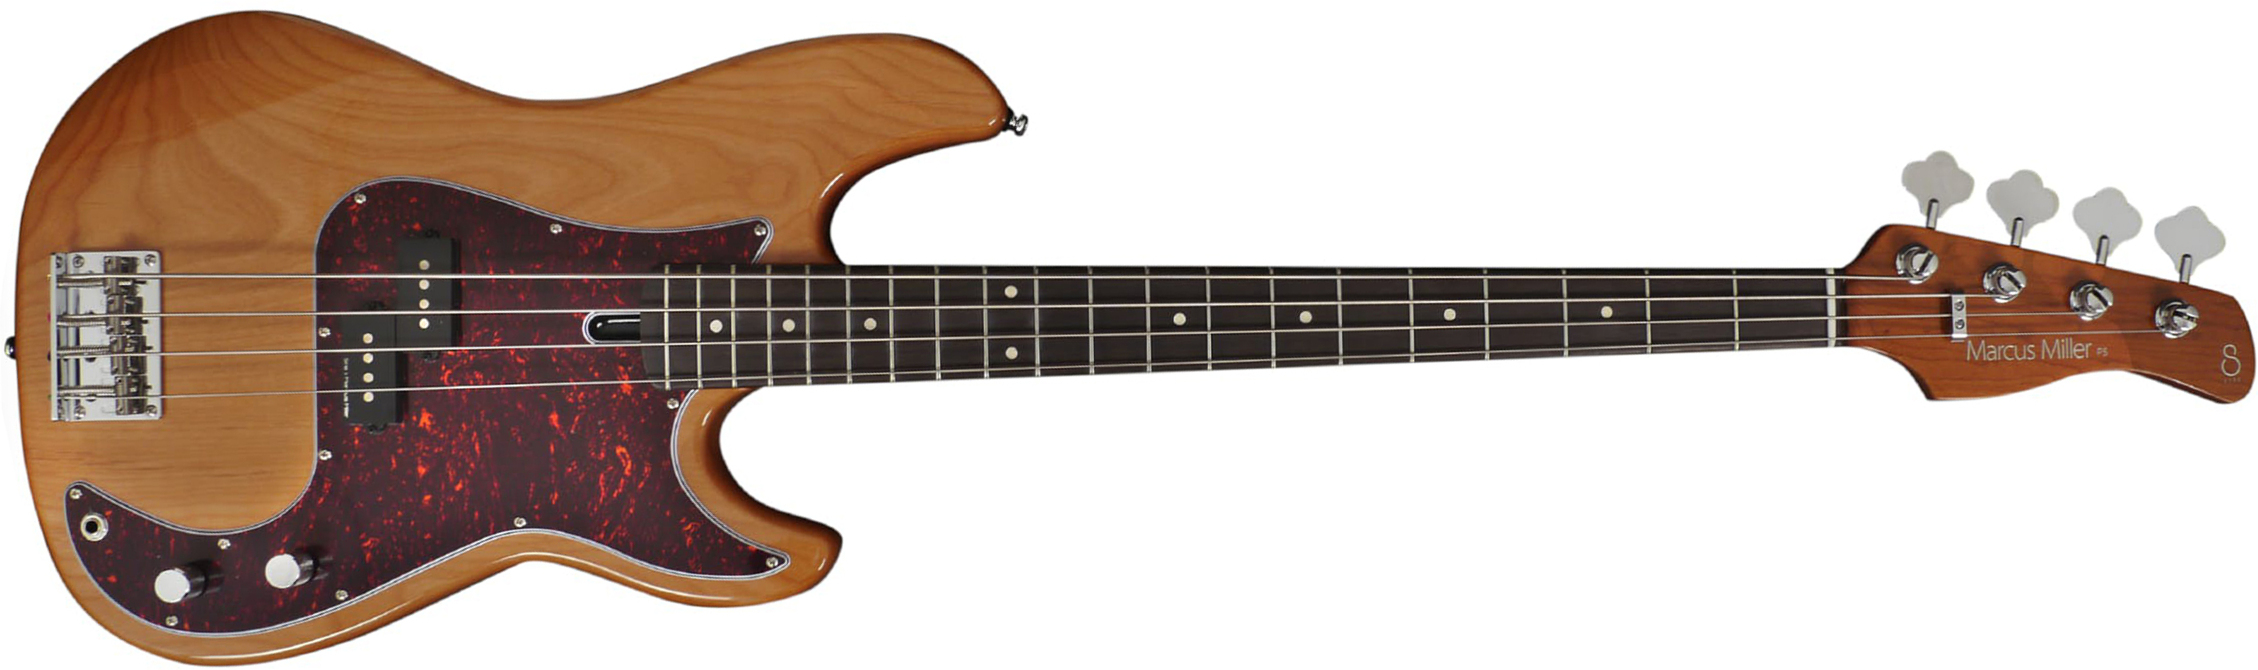 Marcus Miller P5r 4st Rw - Natural - Solid body electric bass - Main picture